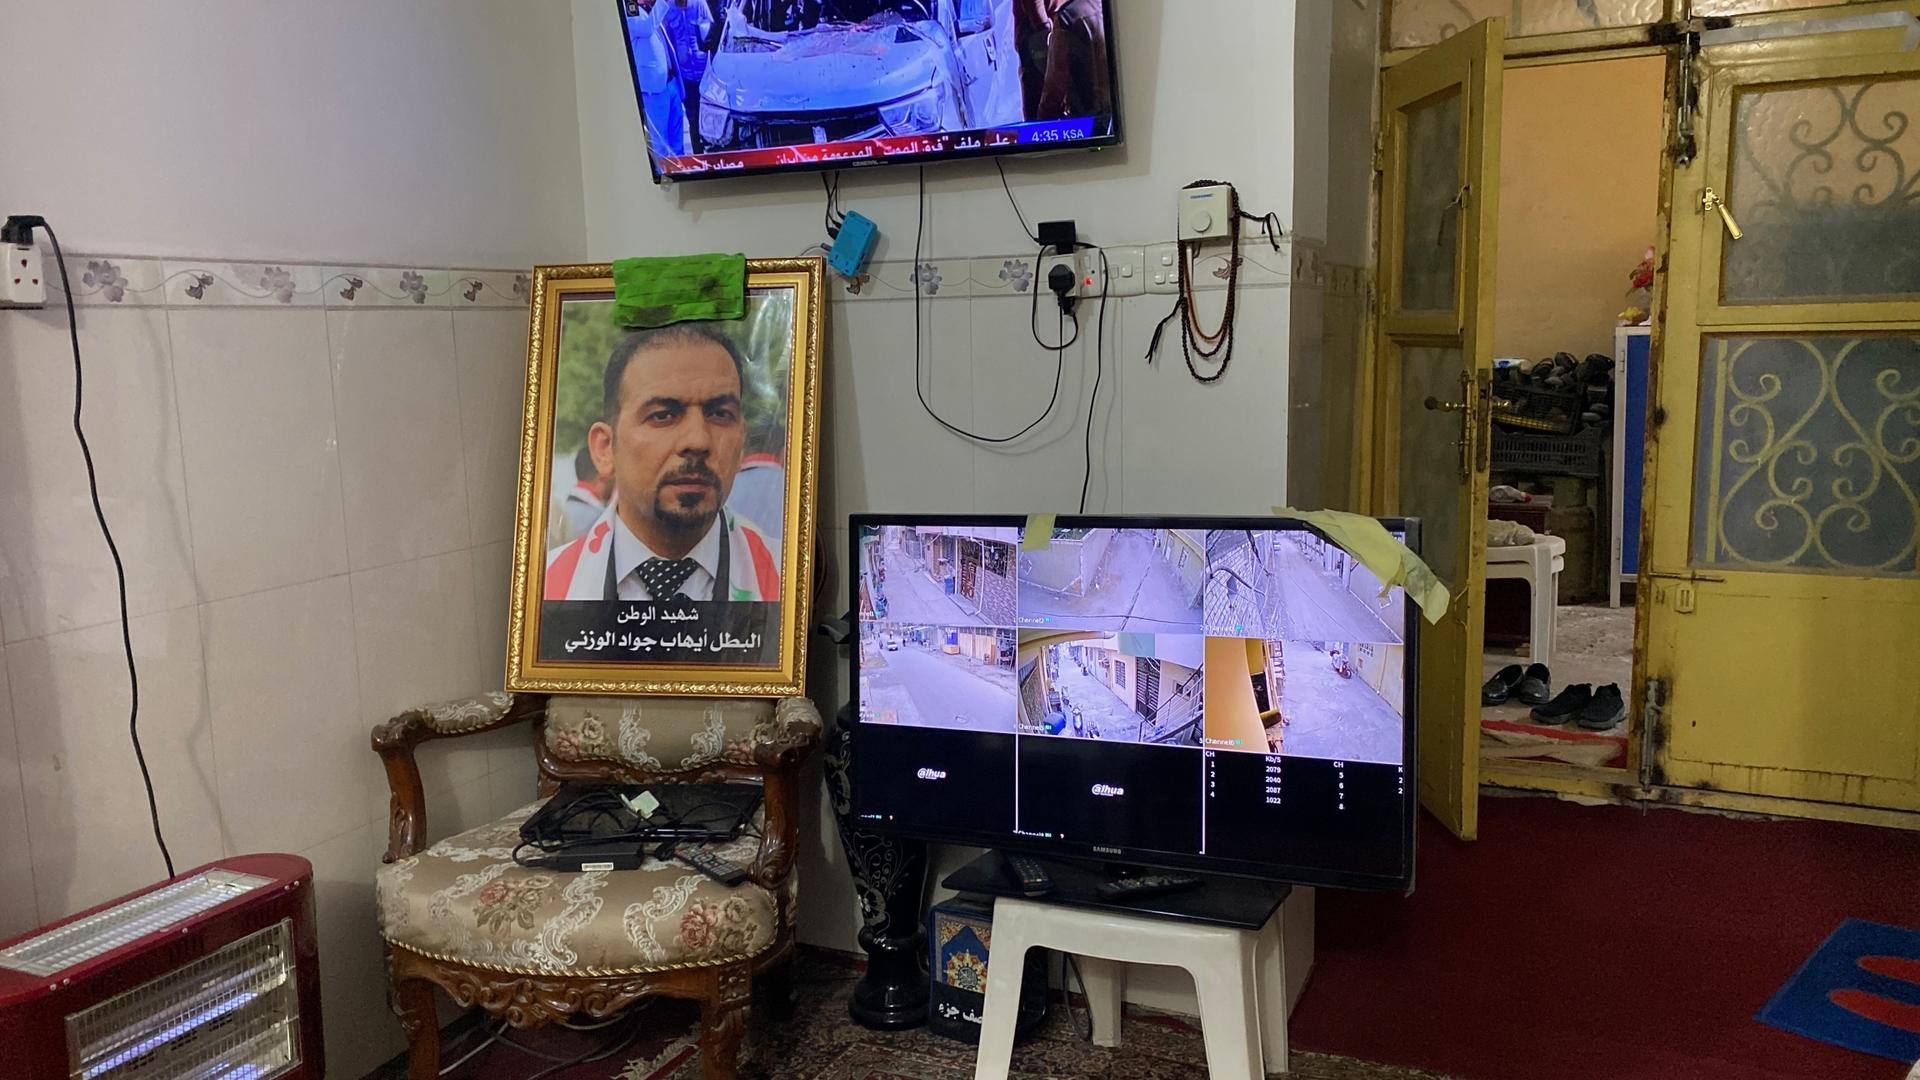 A portrait of slain Iraqi activist Ehab al-Wazni sits propped up in a chair in his family’s living room in Karbala, Iraq. Atop it is a rag of dried blood and next to it is a TV monitor with security camera footage, Dec. 7, 2021. 